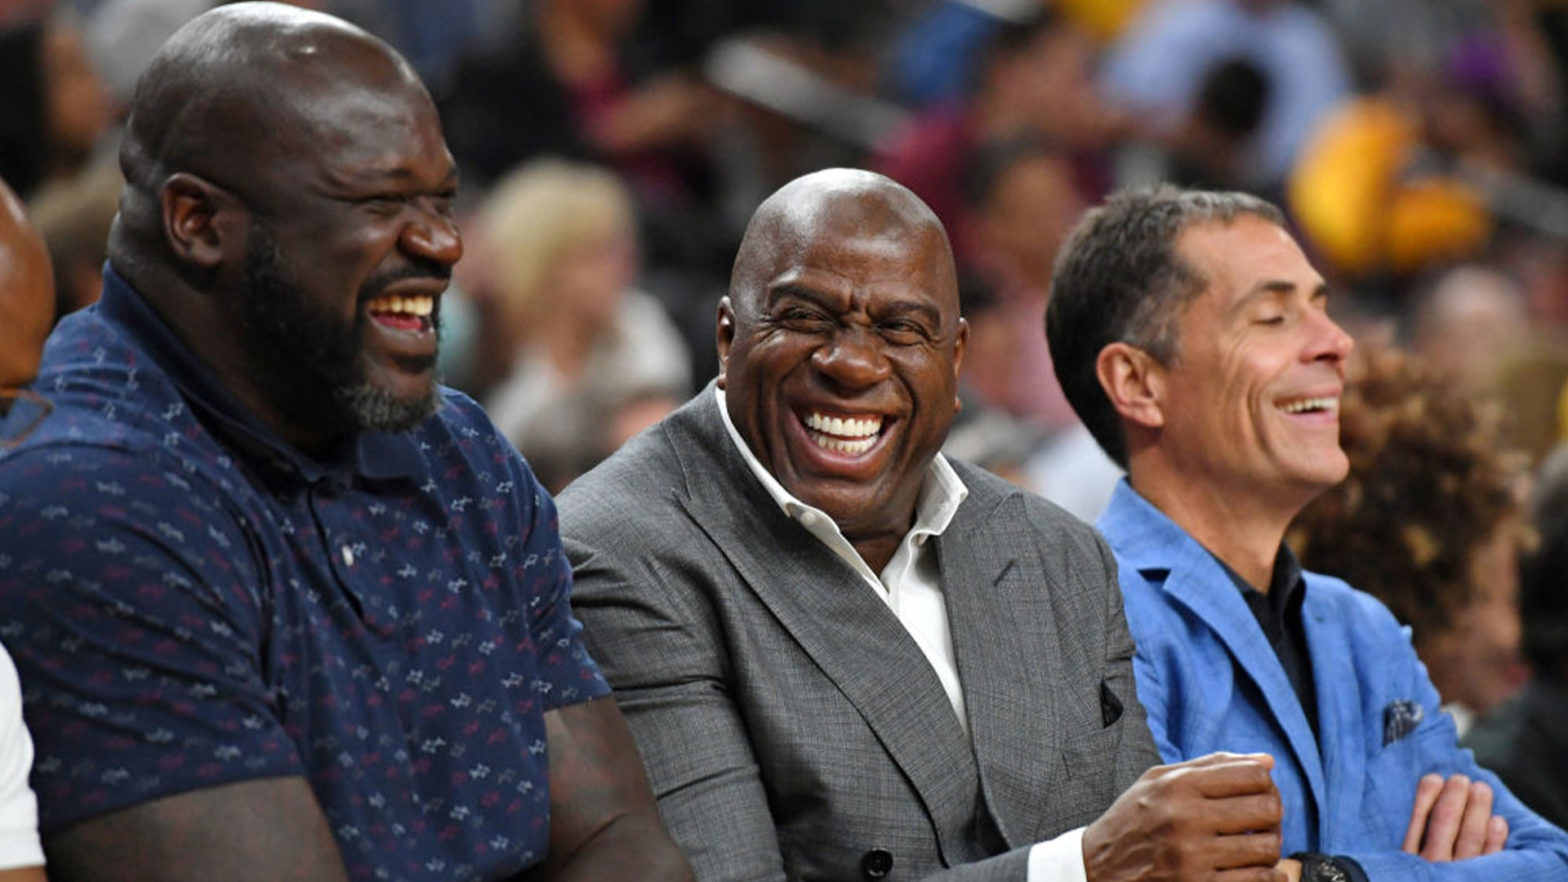 Why Shaquille O'Neal Turned Down A Deal With Starbucks That Magic Johnson Says 'Changed Everything'